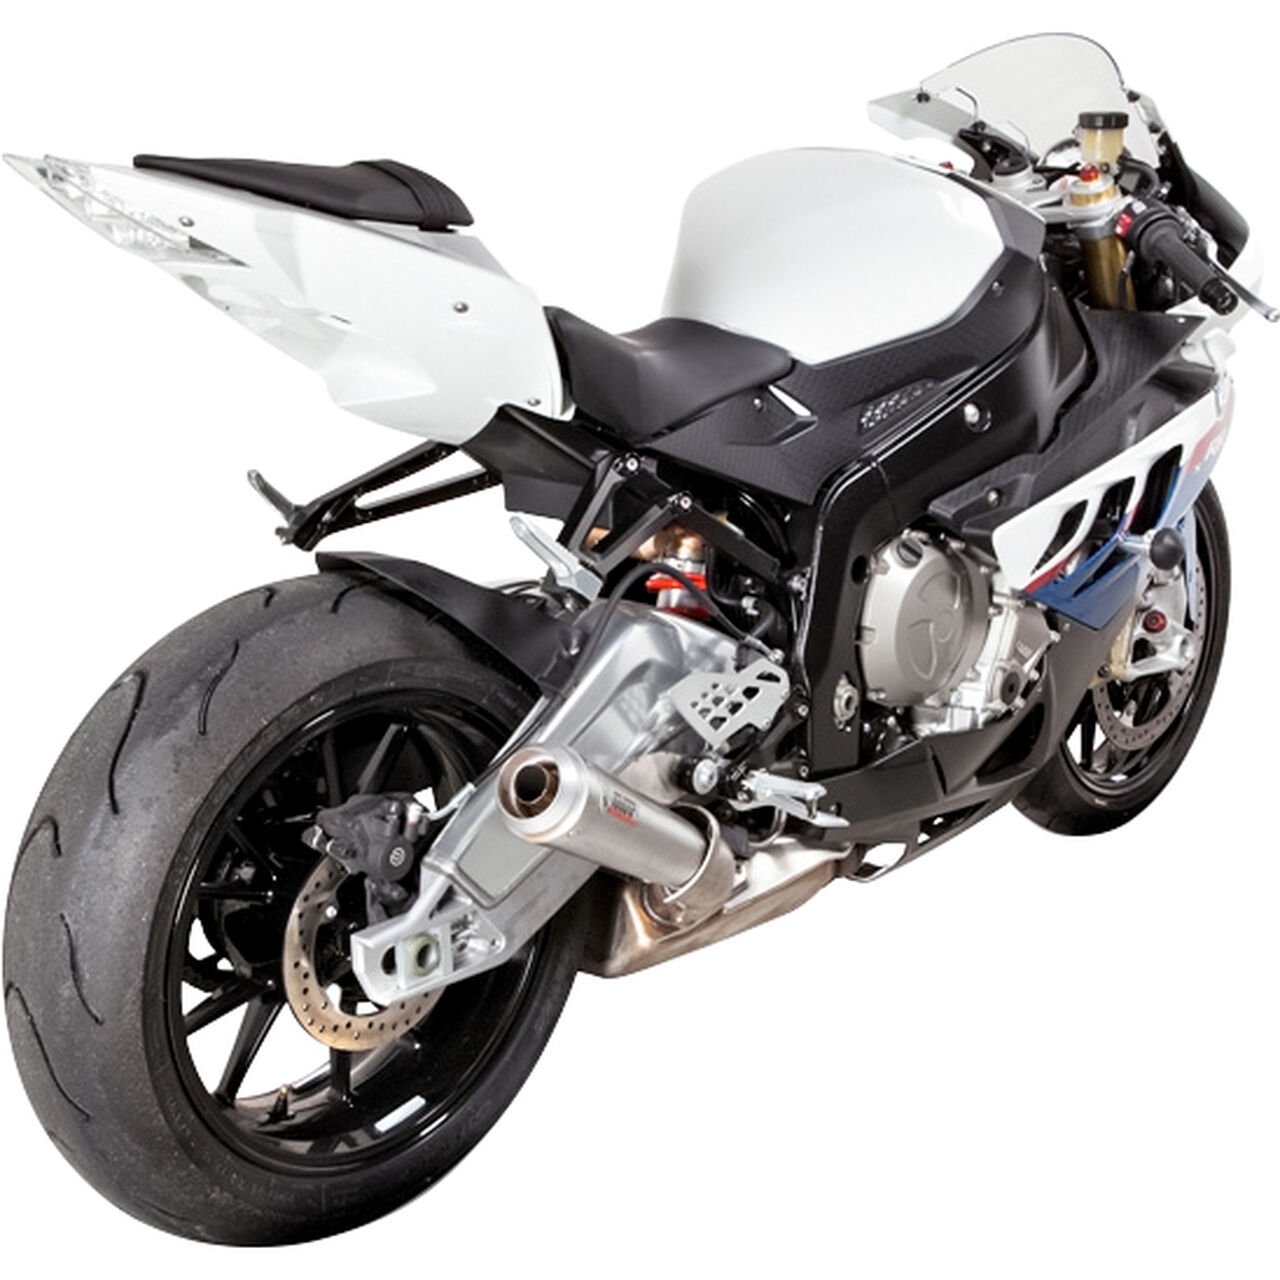 X-Cone Plus exhaust silver B.011.LP2 for S 1000 RR 2009-2014